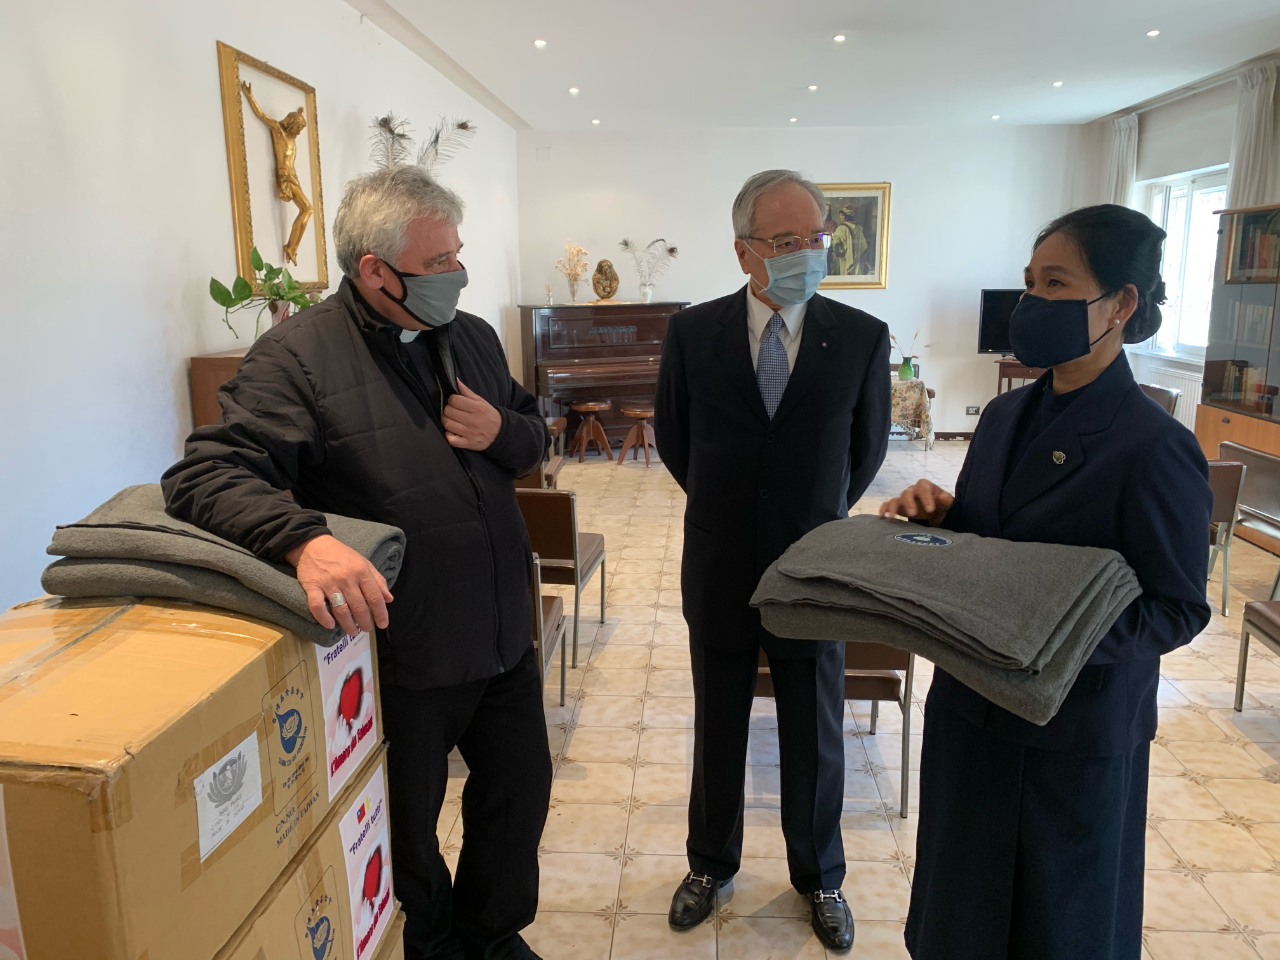 On October 21 at Villa Serena, Ambassador Lee, presented Cardinal Krajewski with 65 eco-blankets made in Taiwan with recycled plastic bottles and inspired by the spirit of Laudato sì. The blankets, which were provided by Tzu-Chi Buddhist Charity Foundation, will be distributed to the migrant women sheltered in the building lent by the Sisters Servants of the Divine Providence of Catania to the Pope through the Papal Almoner. The migrants arrived in Italy through the Humanitarian Corridors program. 
The Embassy of the Republic of China (Taiwan) to the Holy See has promptly reacted to the Holy Father’s call to reach out to those in need as real brothers as sisters.
